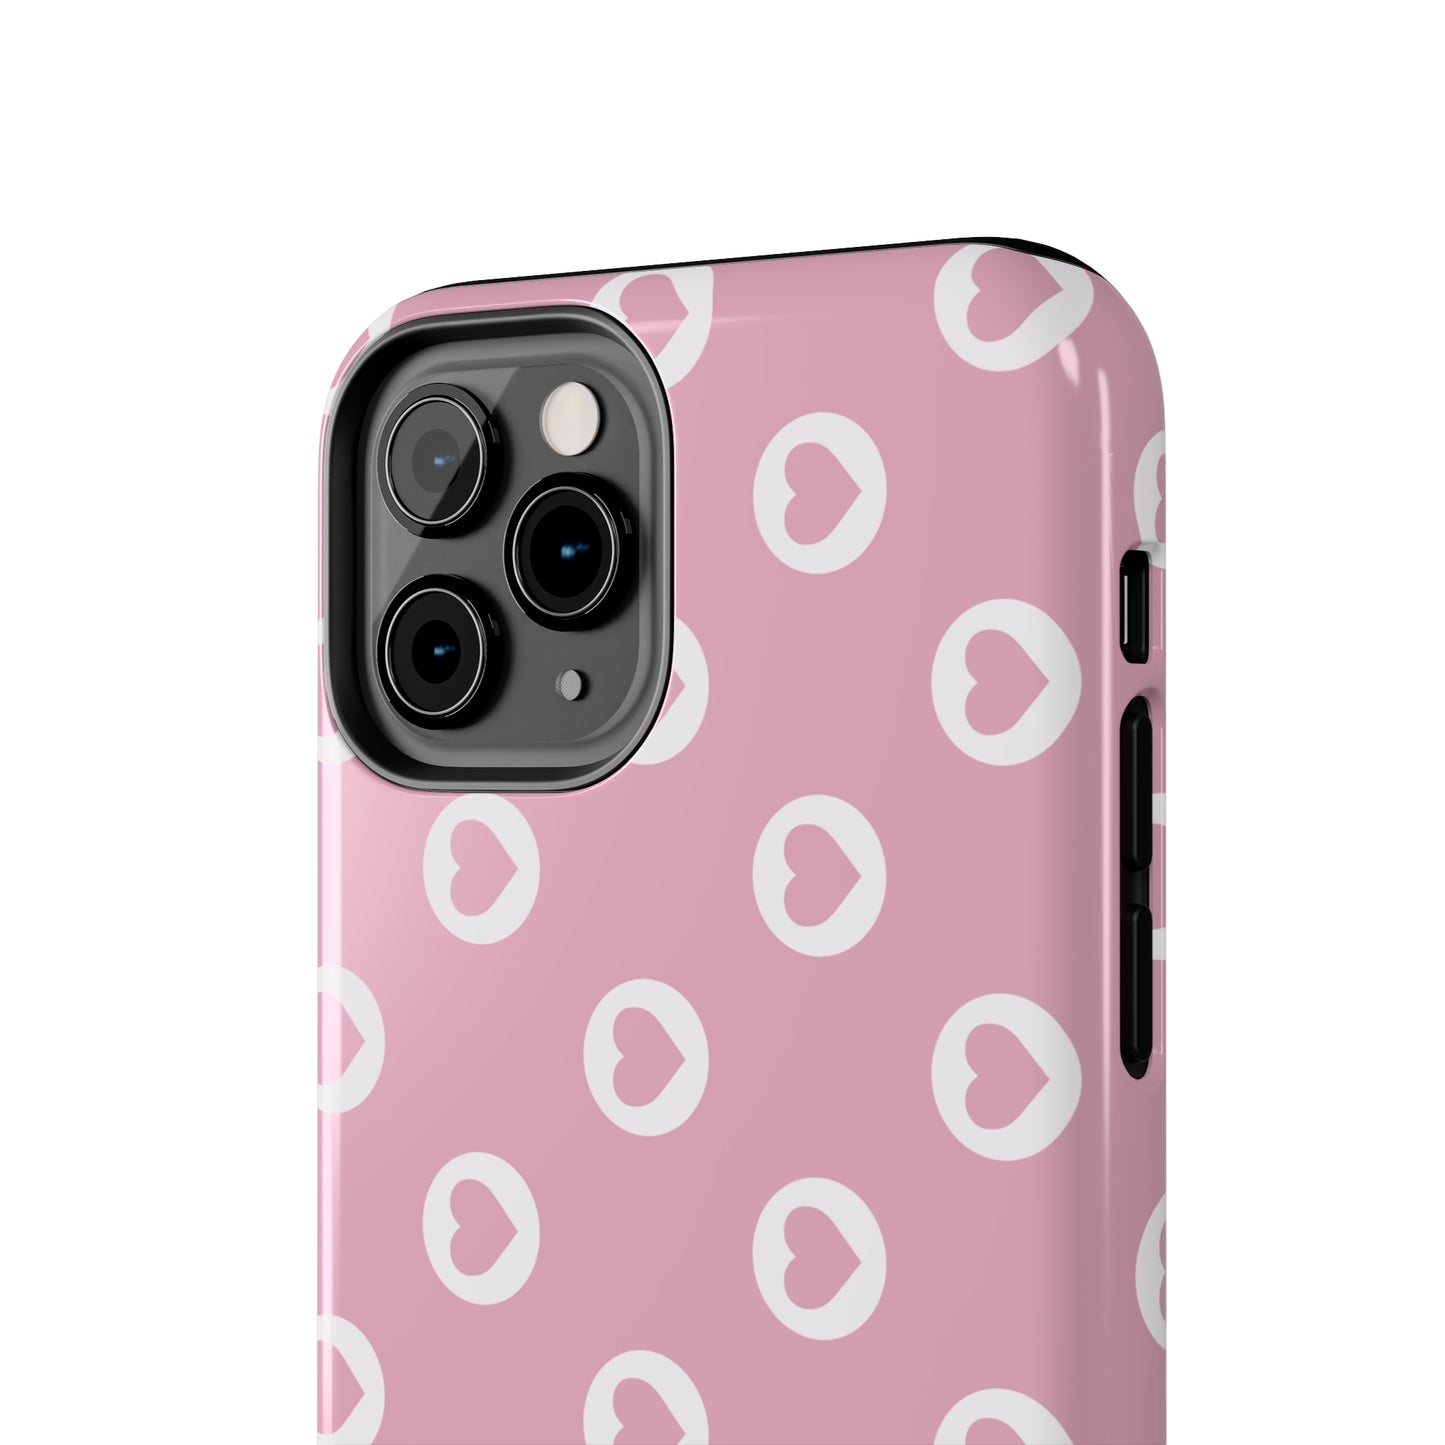 The Heart of Hearts Phone Case